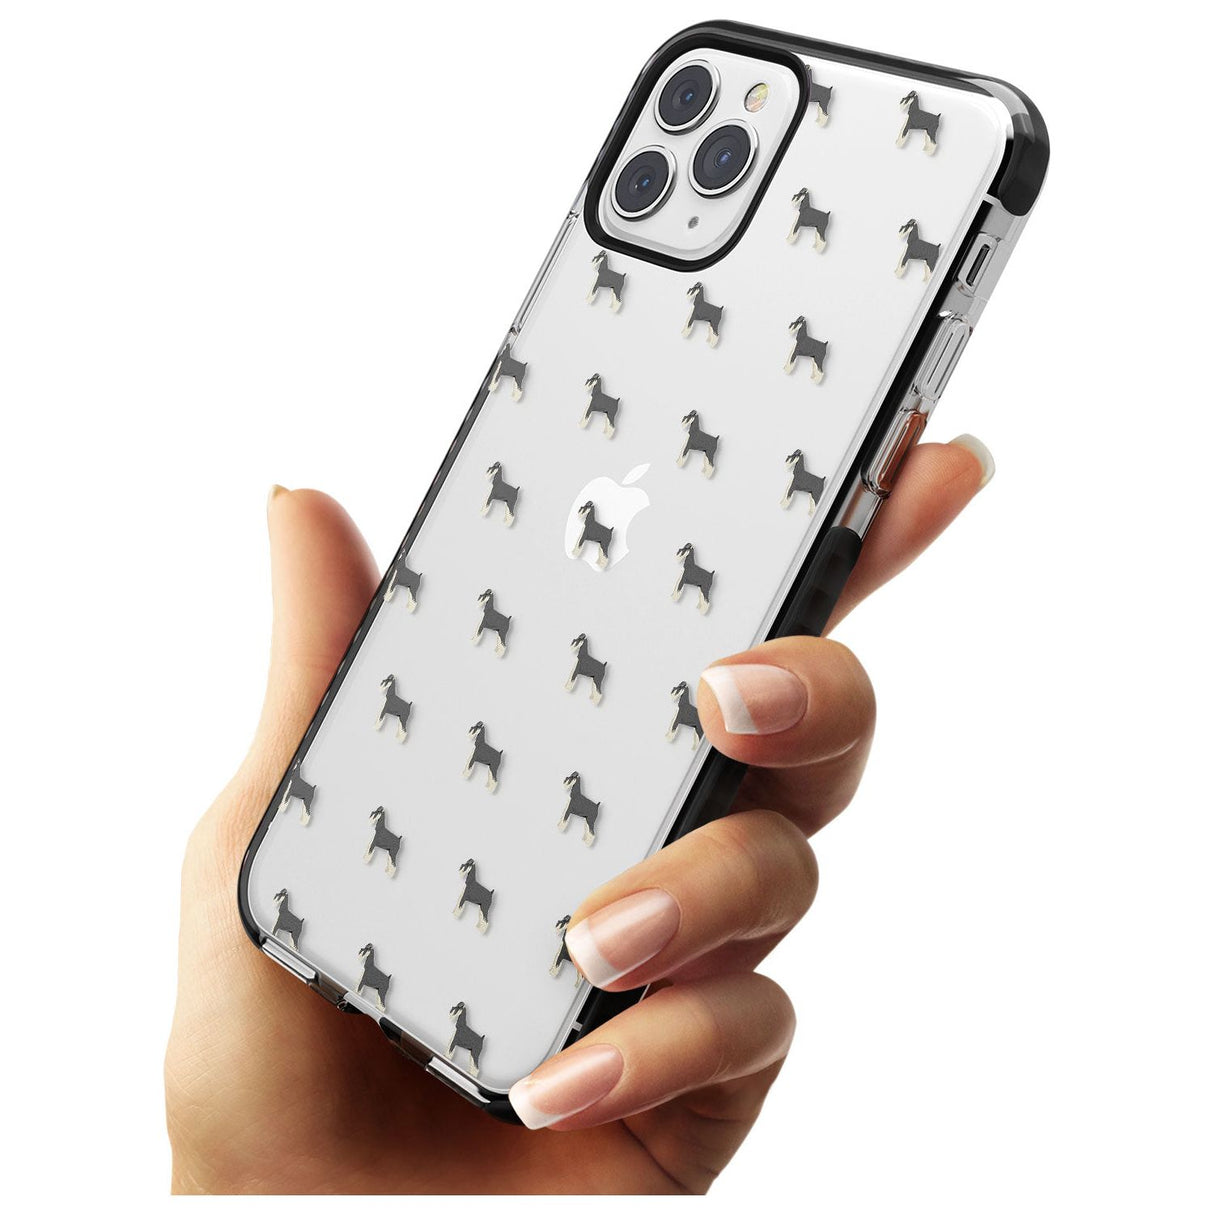 Schnauzer Dog Pattern Clear Black Impact Phone Case for iPhone 11 Pro Max